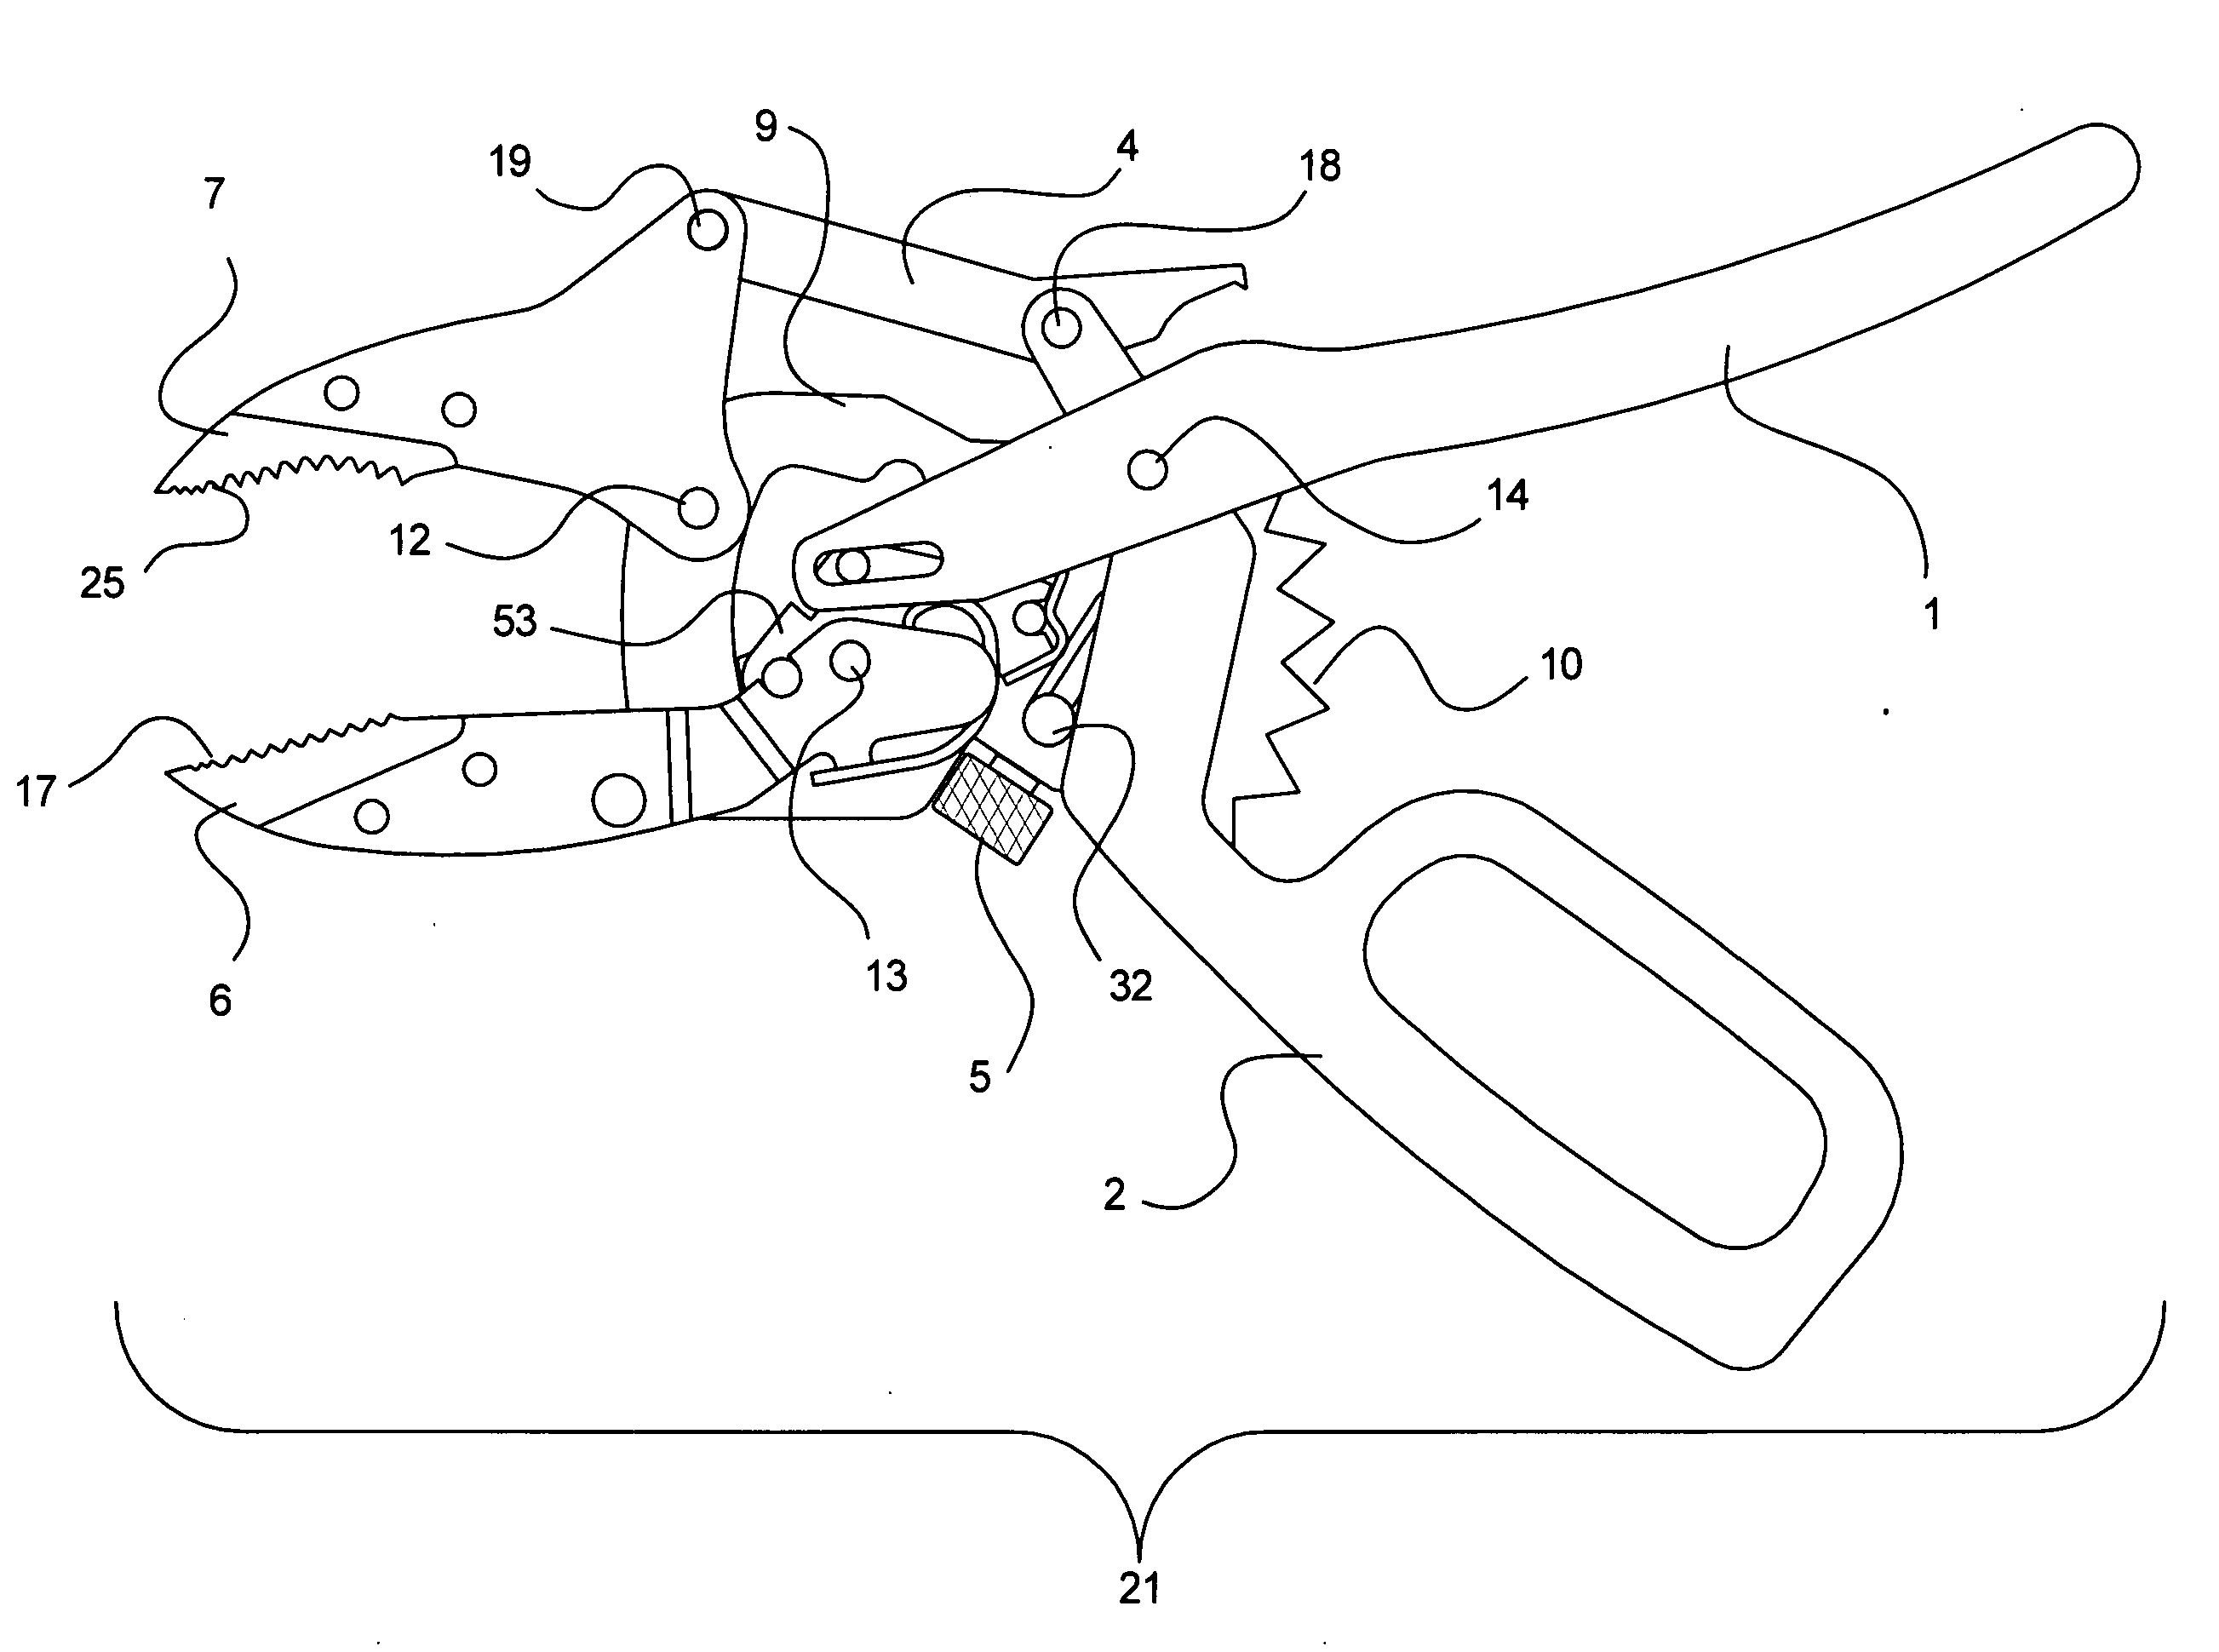 Locking pliers tool with automatic jaw gap adjustment and user-controlled clamping force magnitude